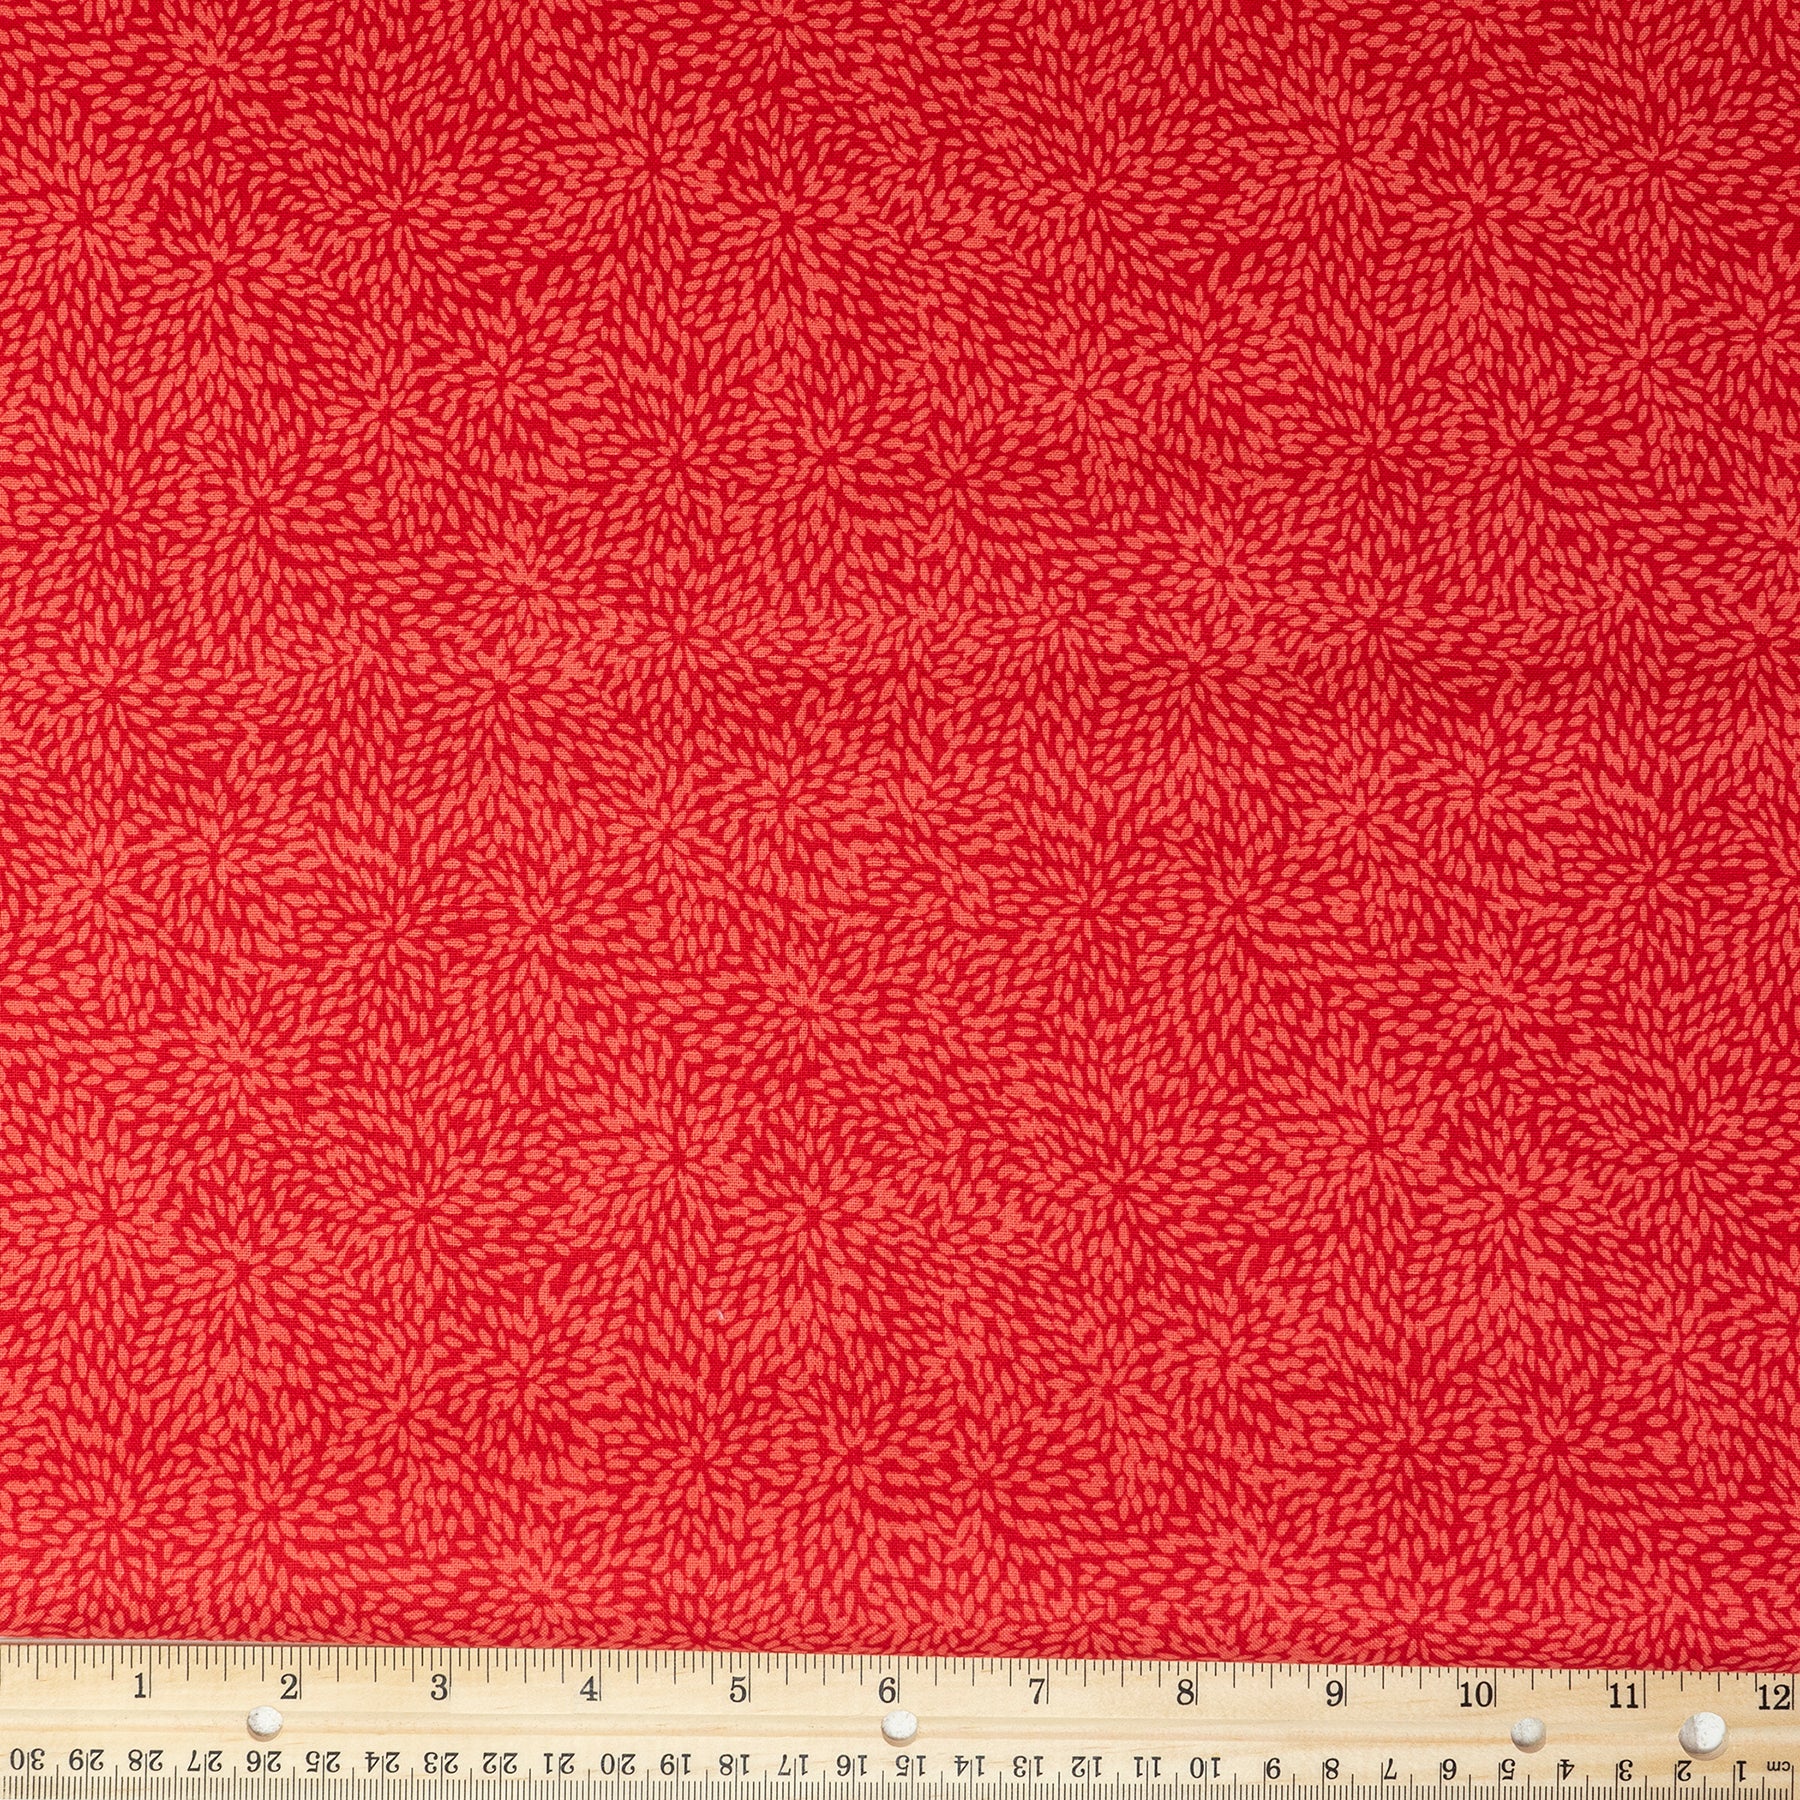 Waverly Inspirations Cotton 44" Burst Red Sewing Fabric by the Yard